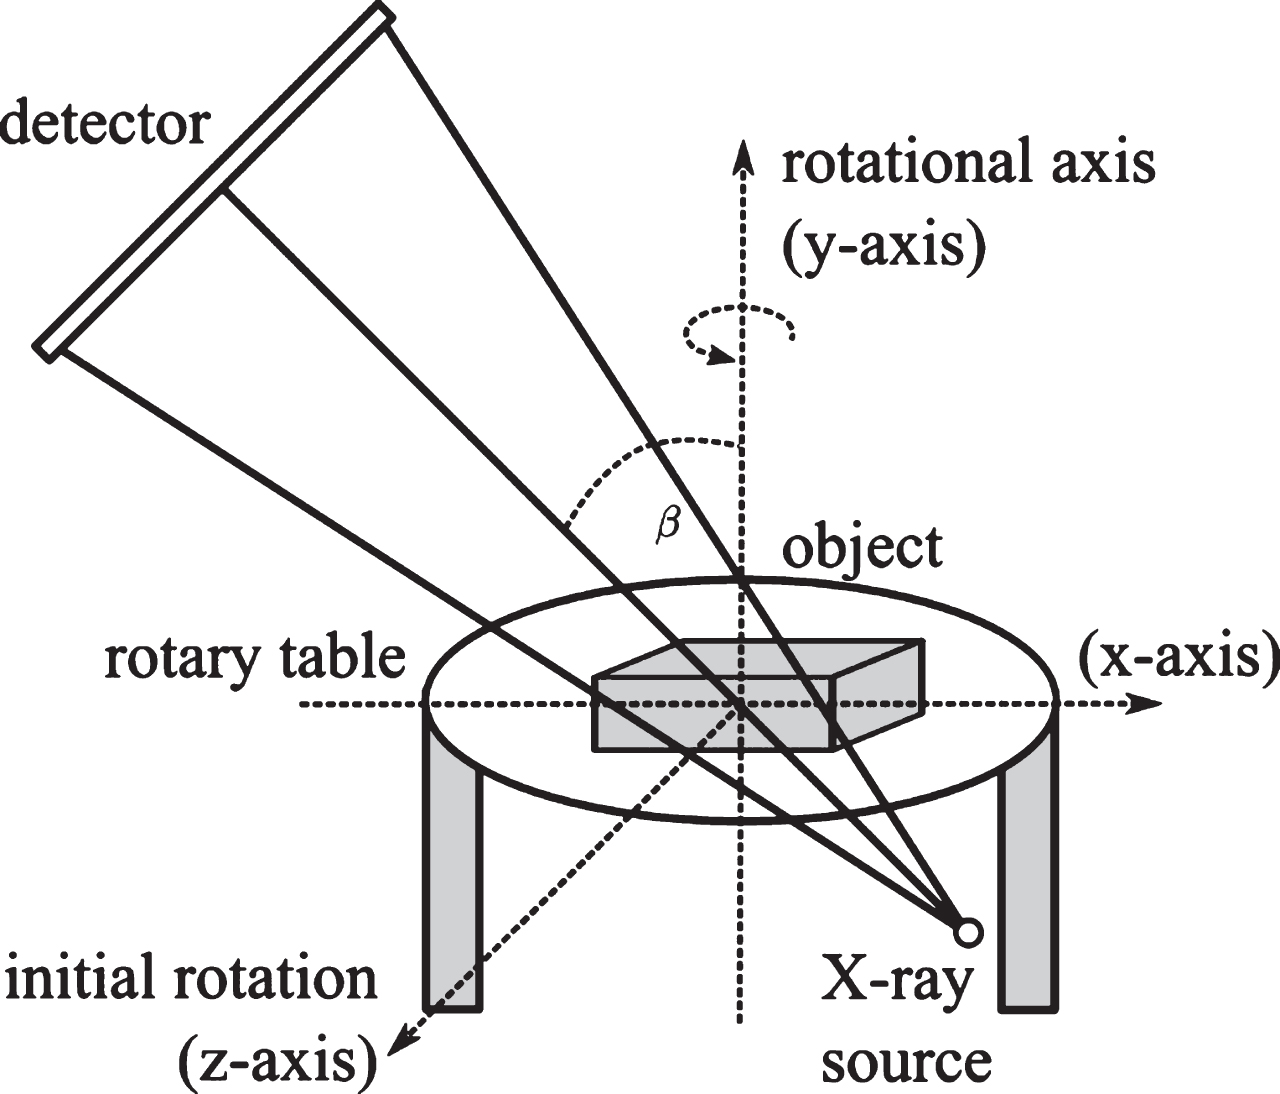 CLARA scanner set up. X-ray source and detector are initially rotated by a fixed angle around a horizontal axis (z-axis in the image). The specimen is then rotated incrementally around the vertical y-axis to acquire projections from different viewing positions. Image adapted from [7].